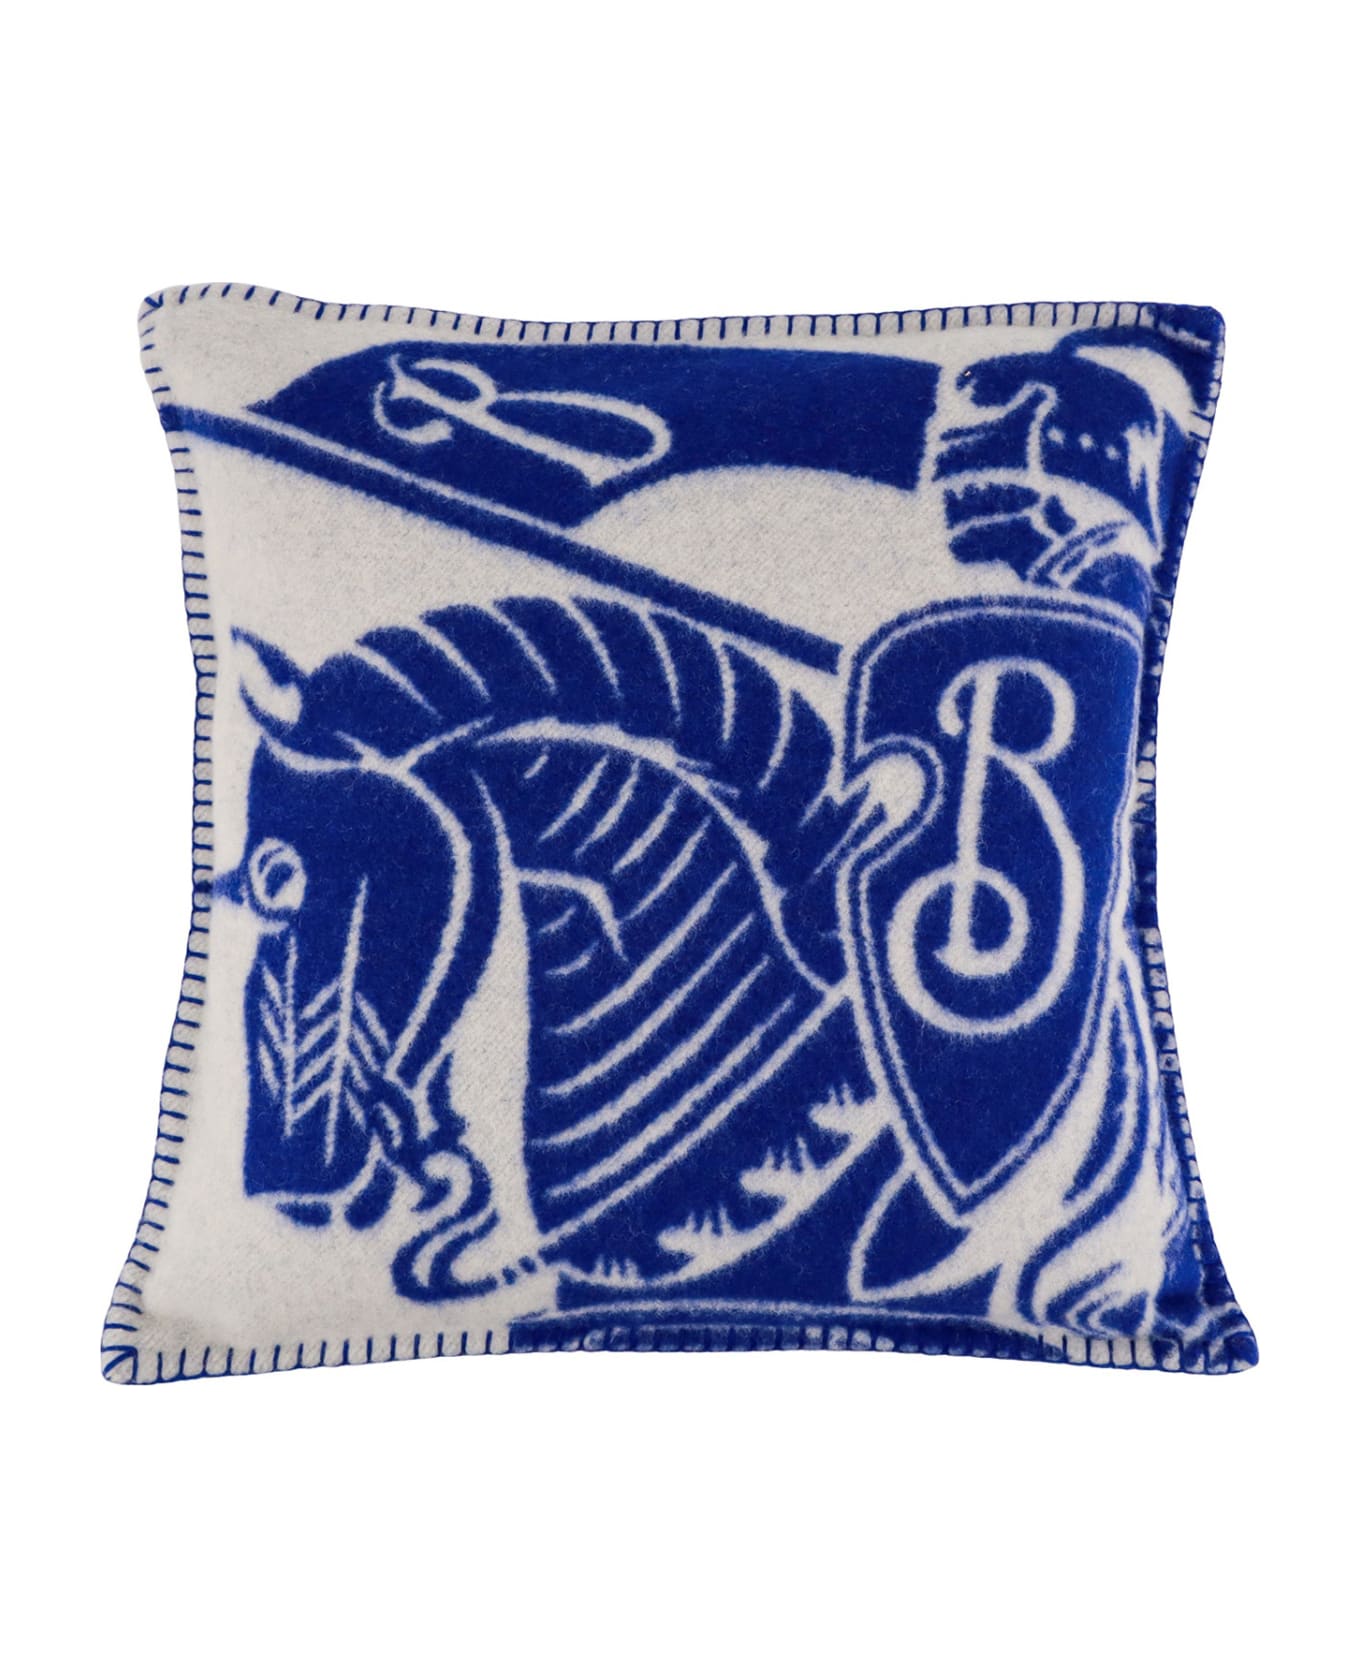 Burberry Cushion - KNIGHT クッション